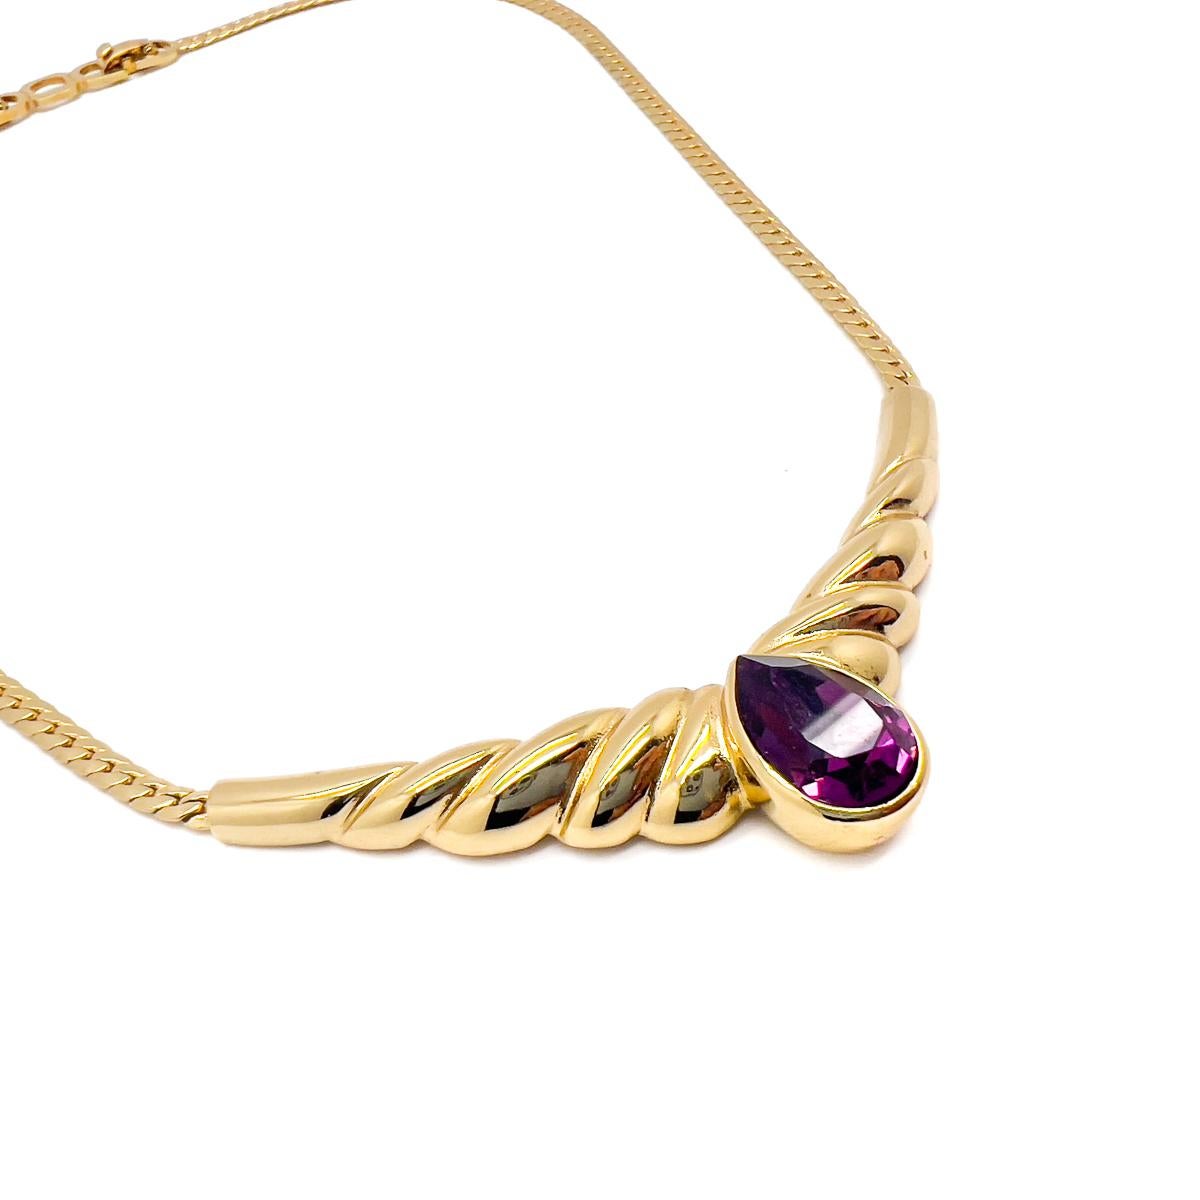 A totally timeless Vintage Christian Dior Amethyst Teardrop Necklace. A wonderful teardrop cut amethyst crystal set in a luxurious gold plated mount and finished with an elegant snake link chain. A forever treasure for your jewel box that will add